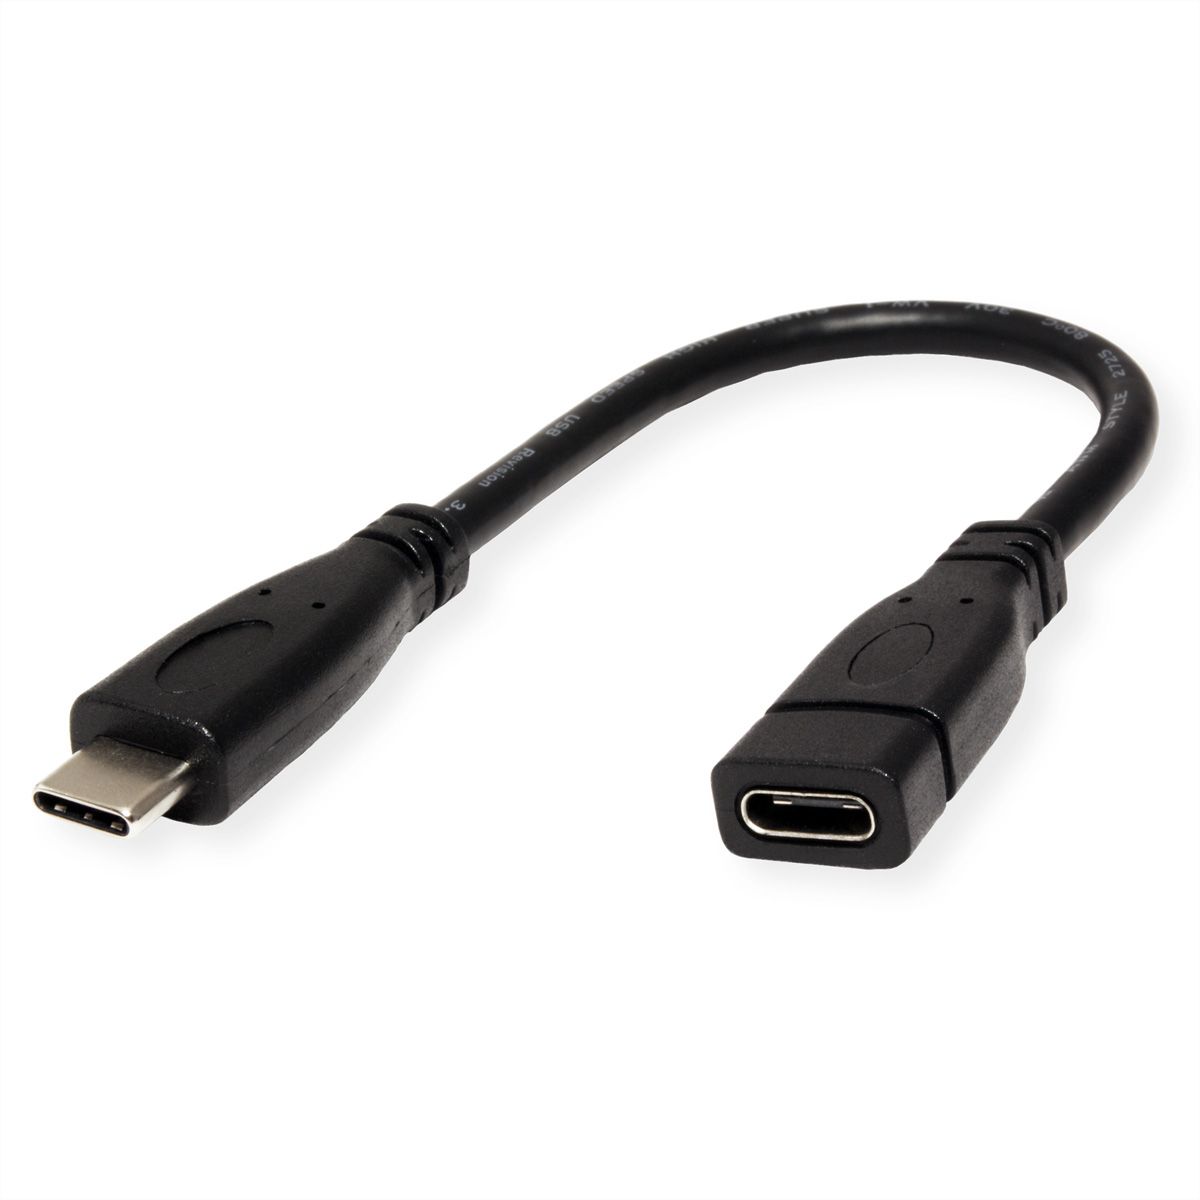 Cablecc 50-200cm 10Gbps USB-C USB 3.1 Type C Gen2 Male to Male Data 100W Cable with E-Marker 150cm 